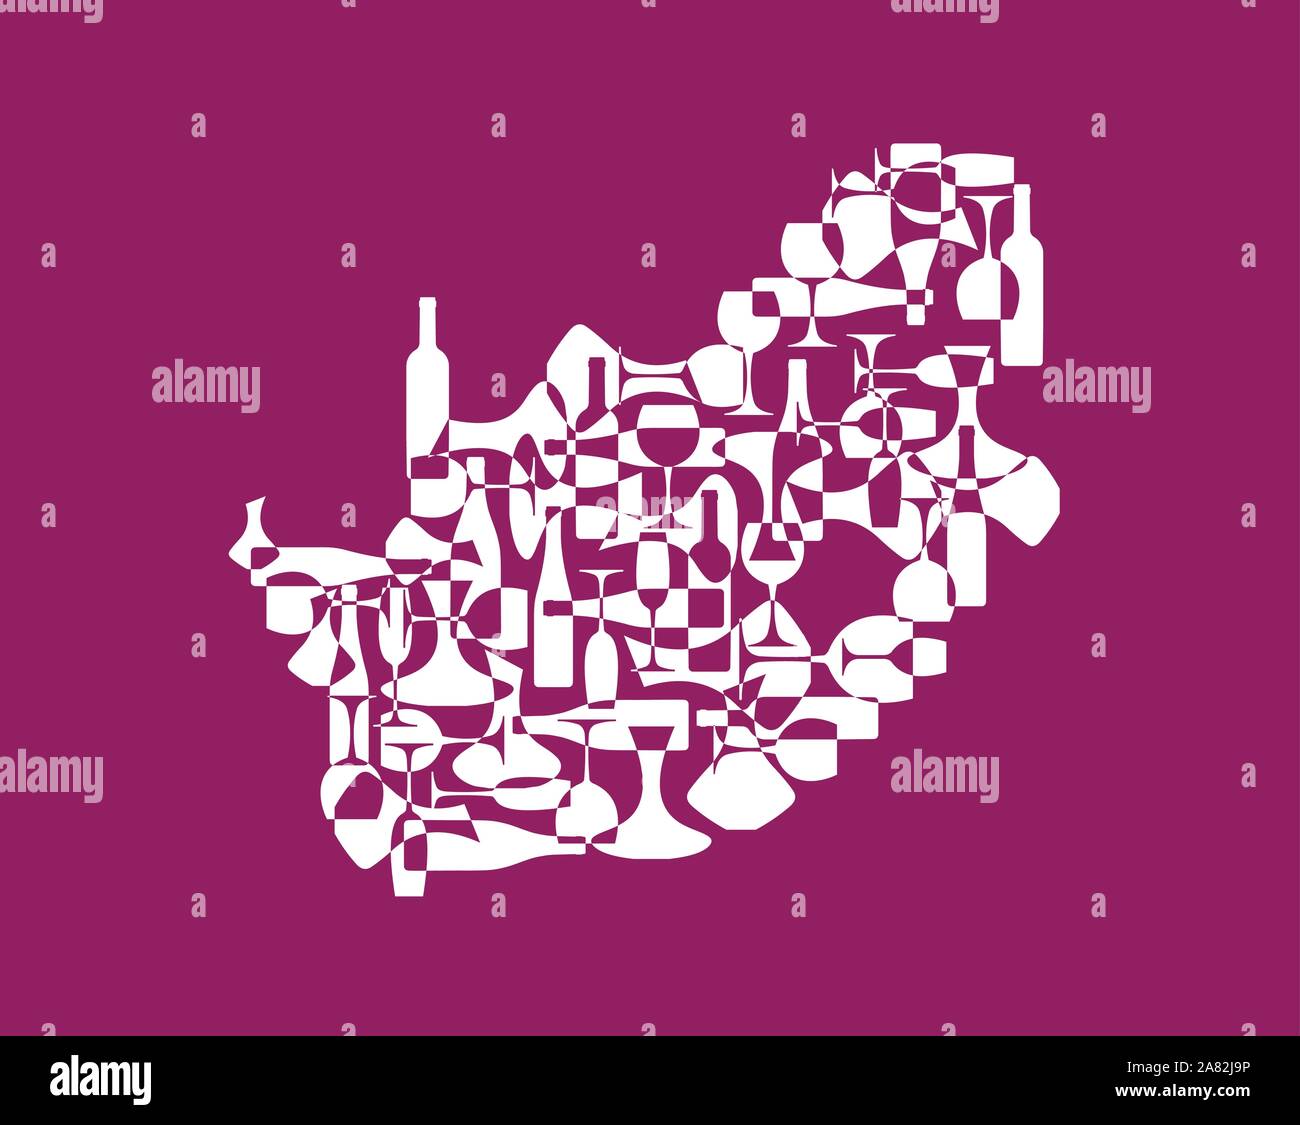 Countries winemakers - stylized maps from silhouettes of wine bottles, glasses and decanters. Map of South Africa. Stock Vector